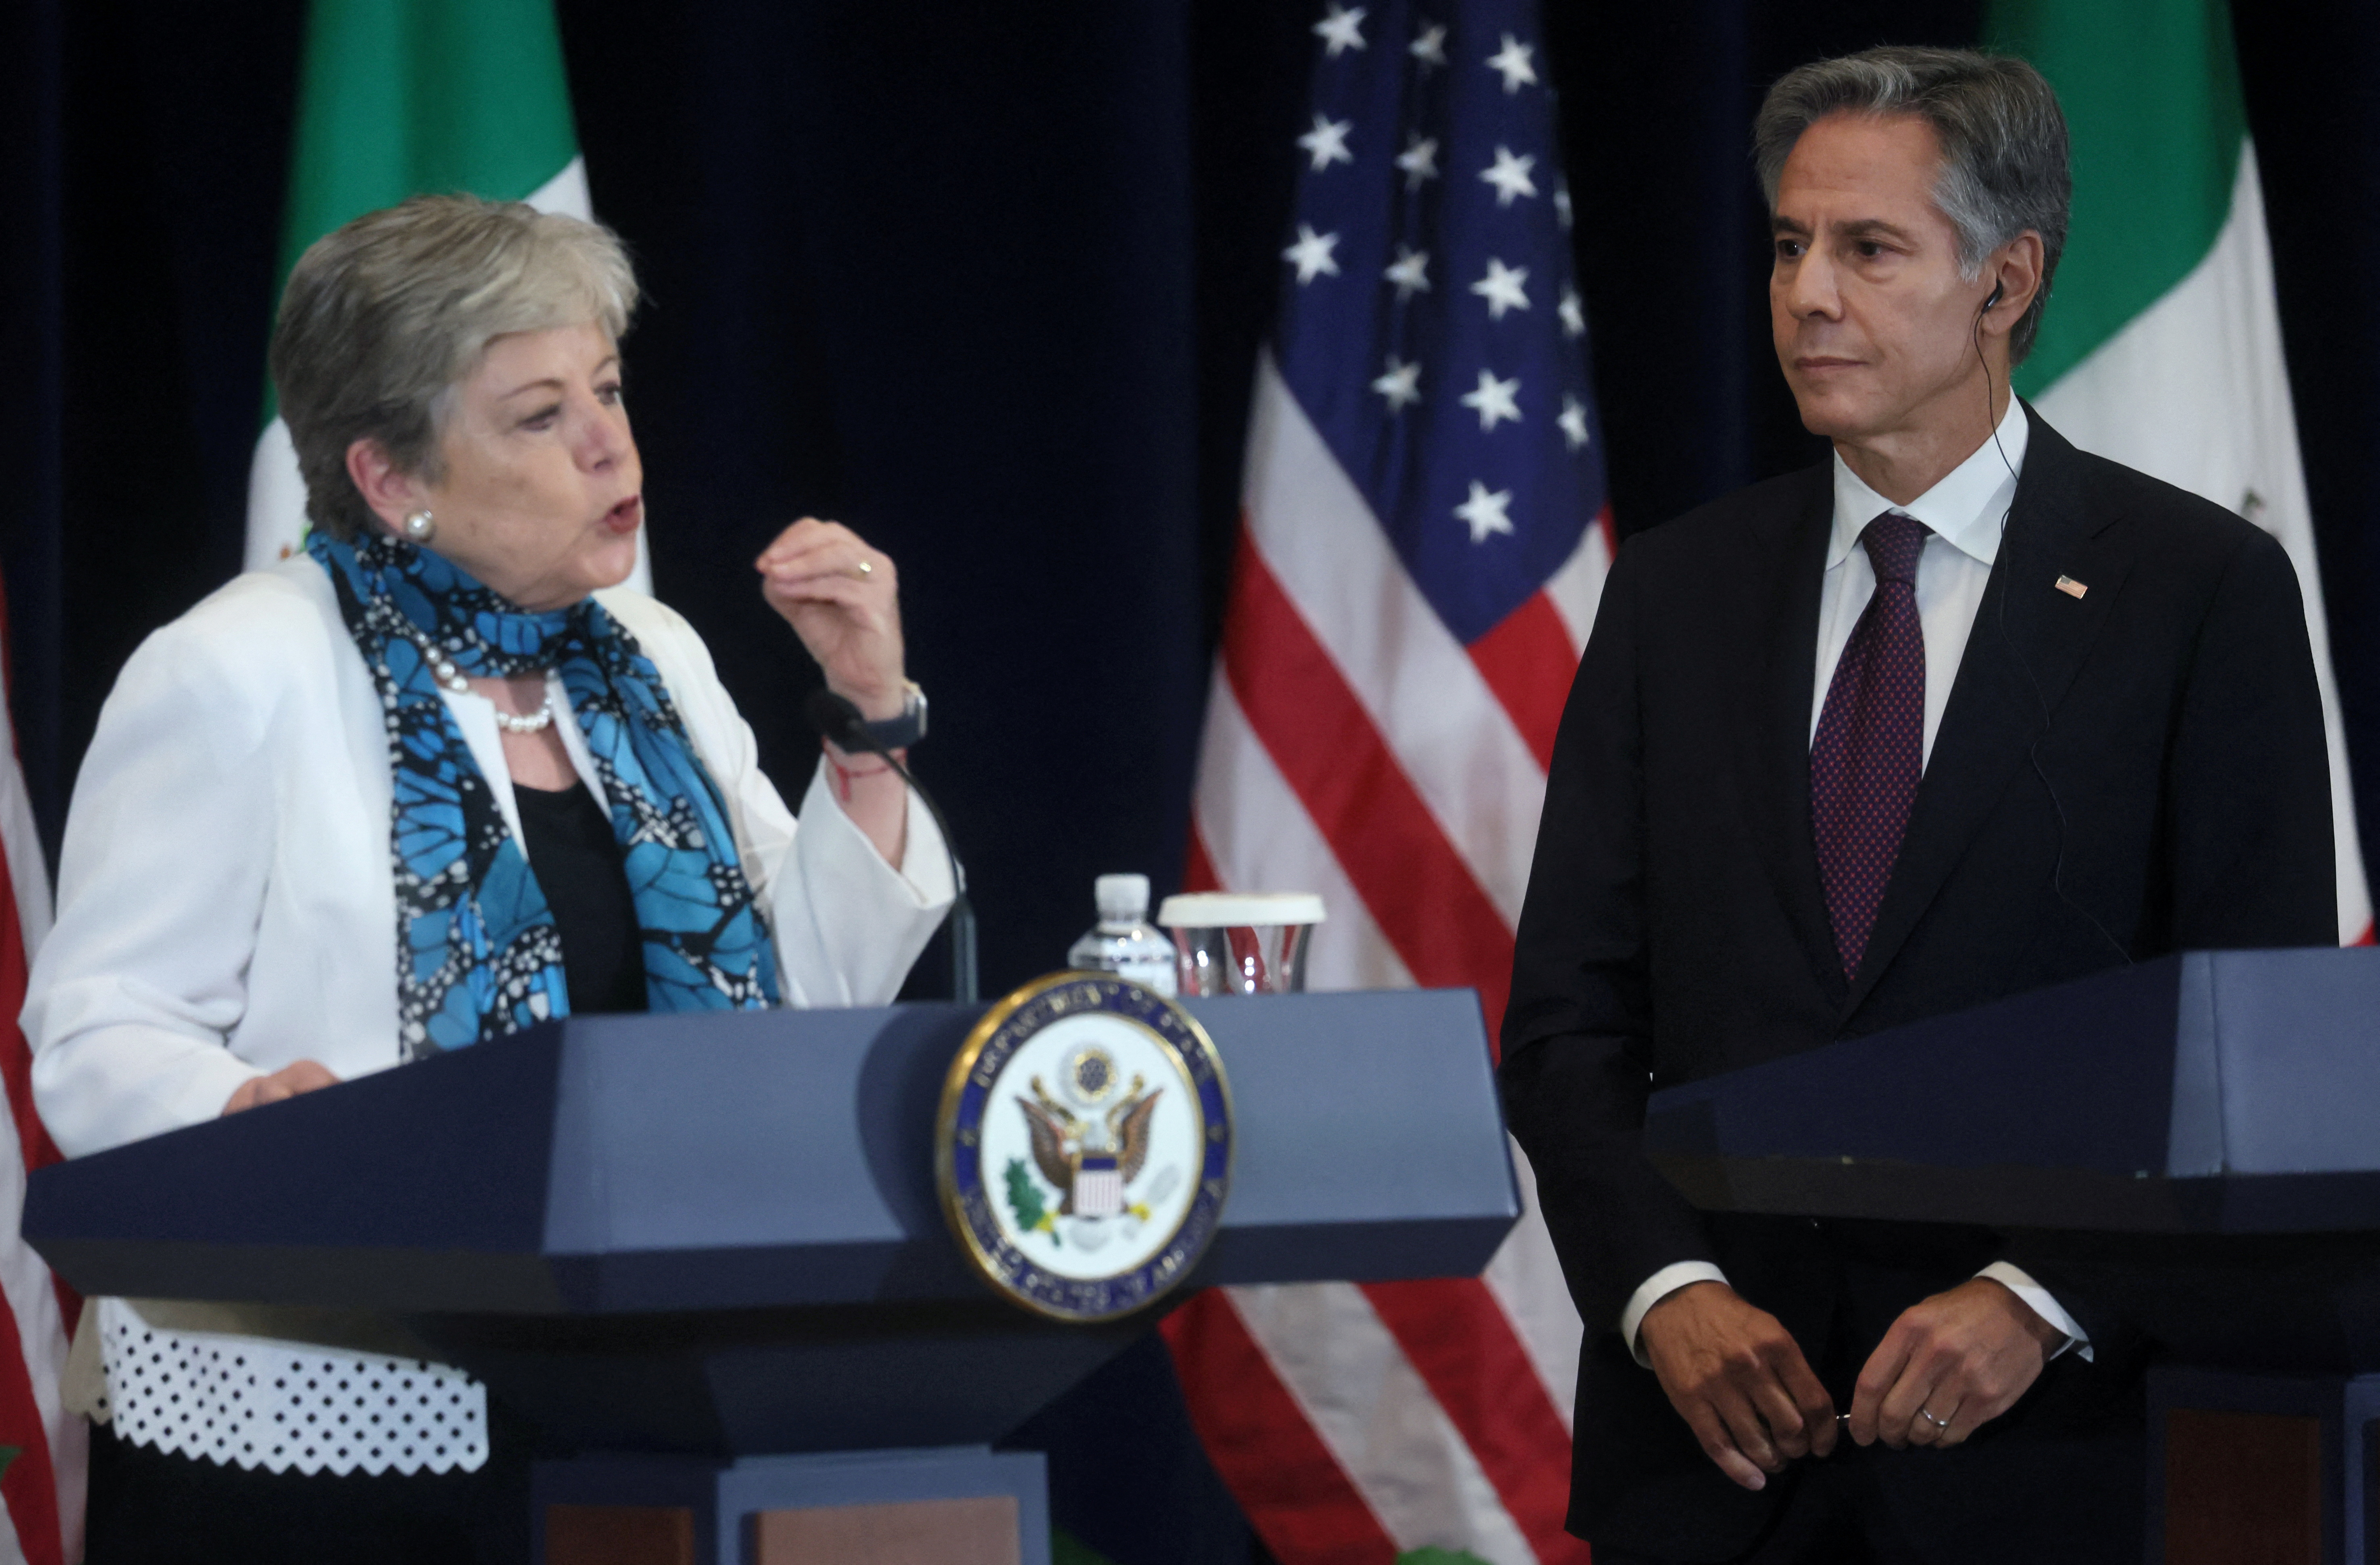 U.S.-Mexico High-Level Economic Dialogue at the State Department in Washington